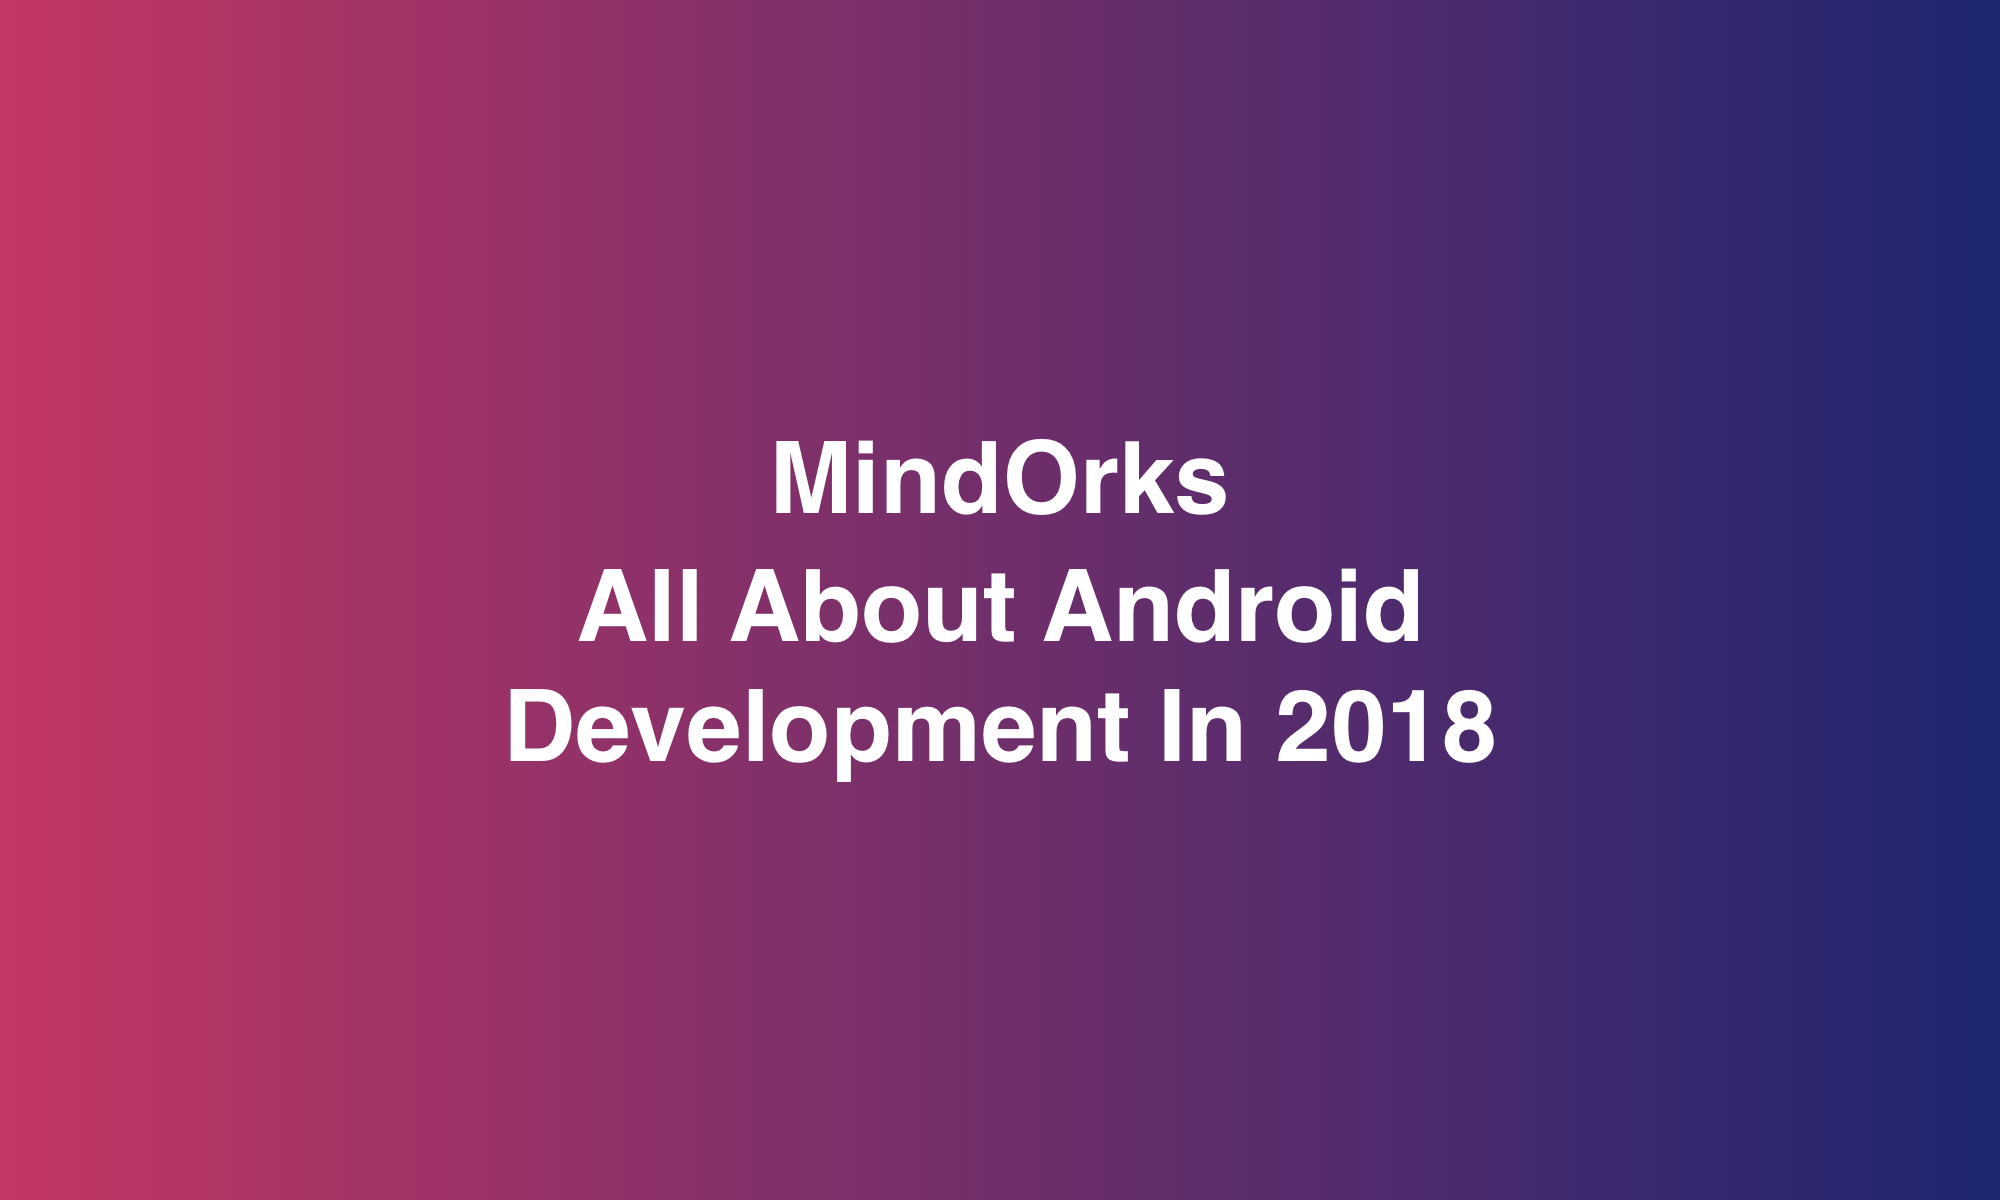 All About Android Development In 2018